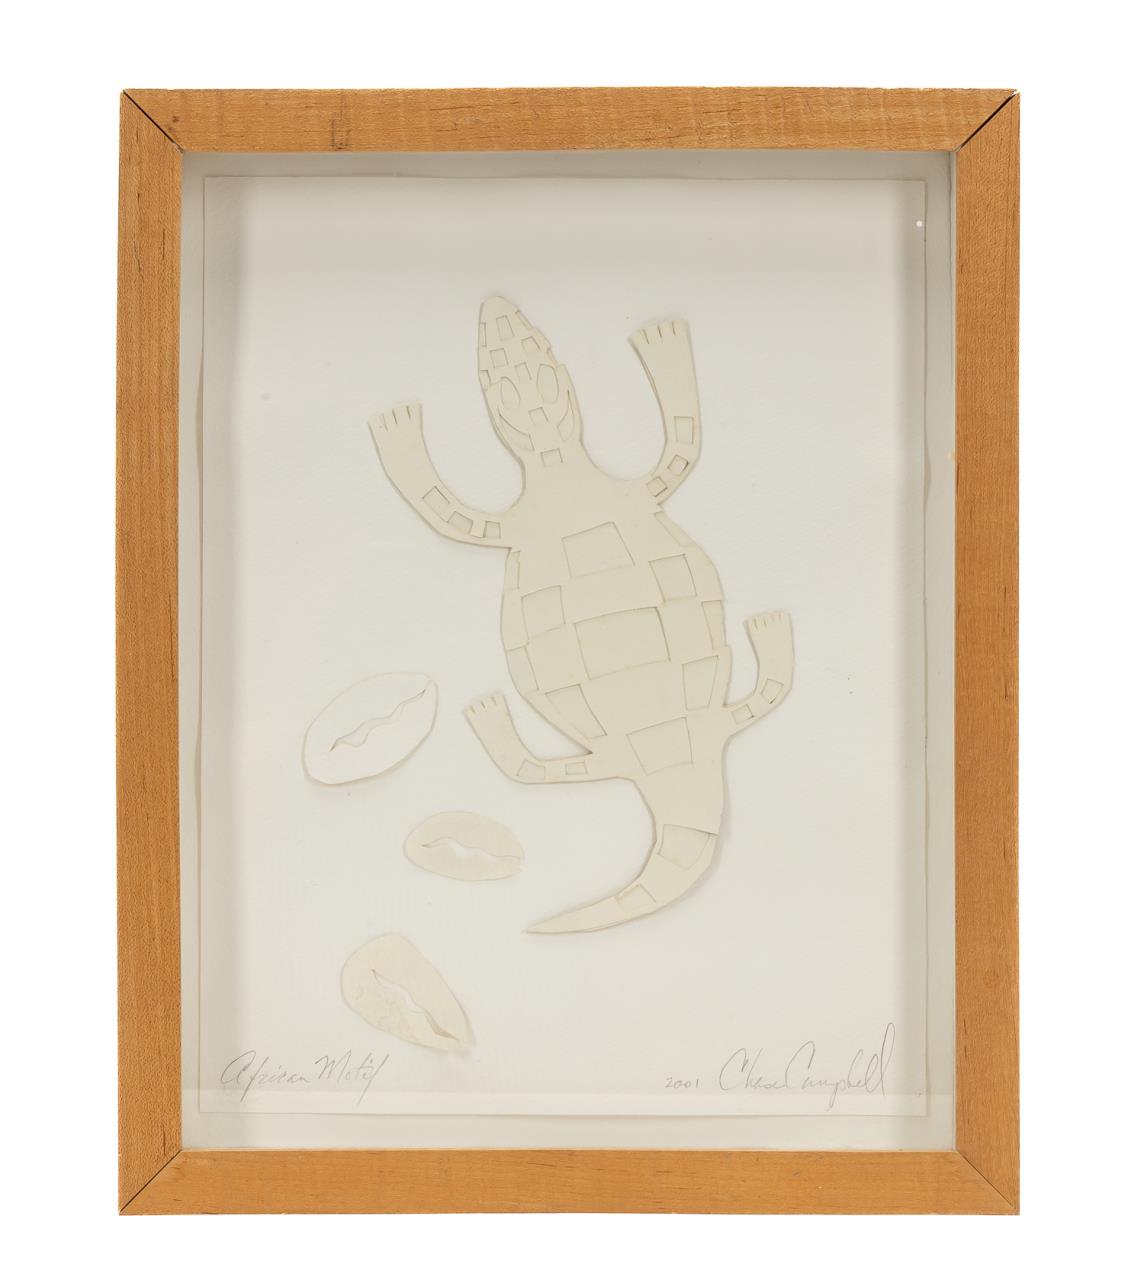 CHASE CAMPBELL, PAPER CUT CROCODILE,